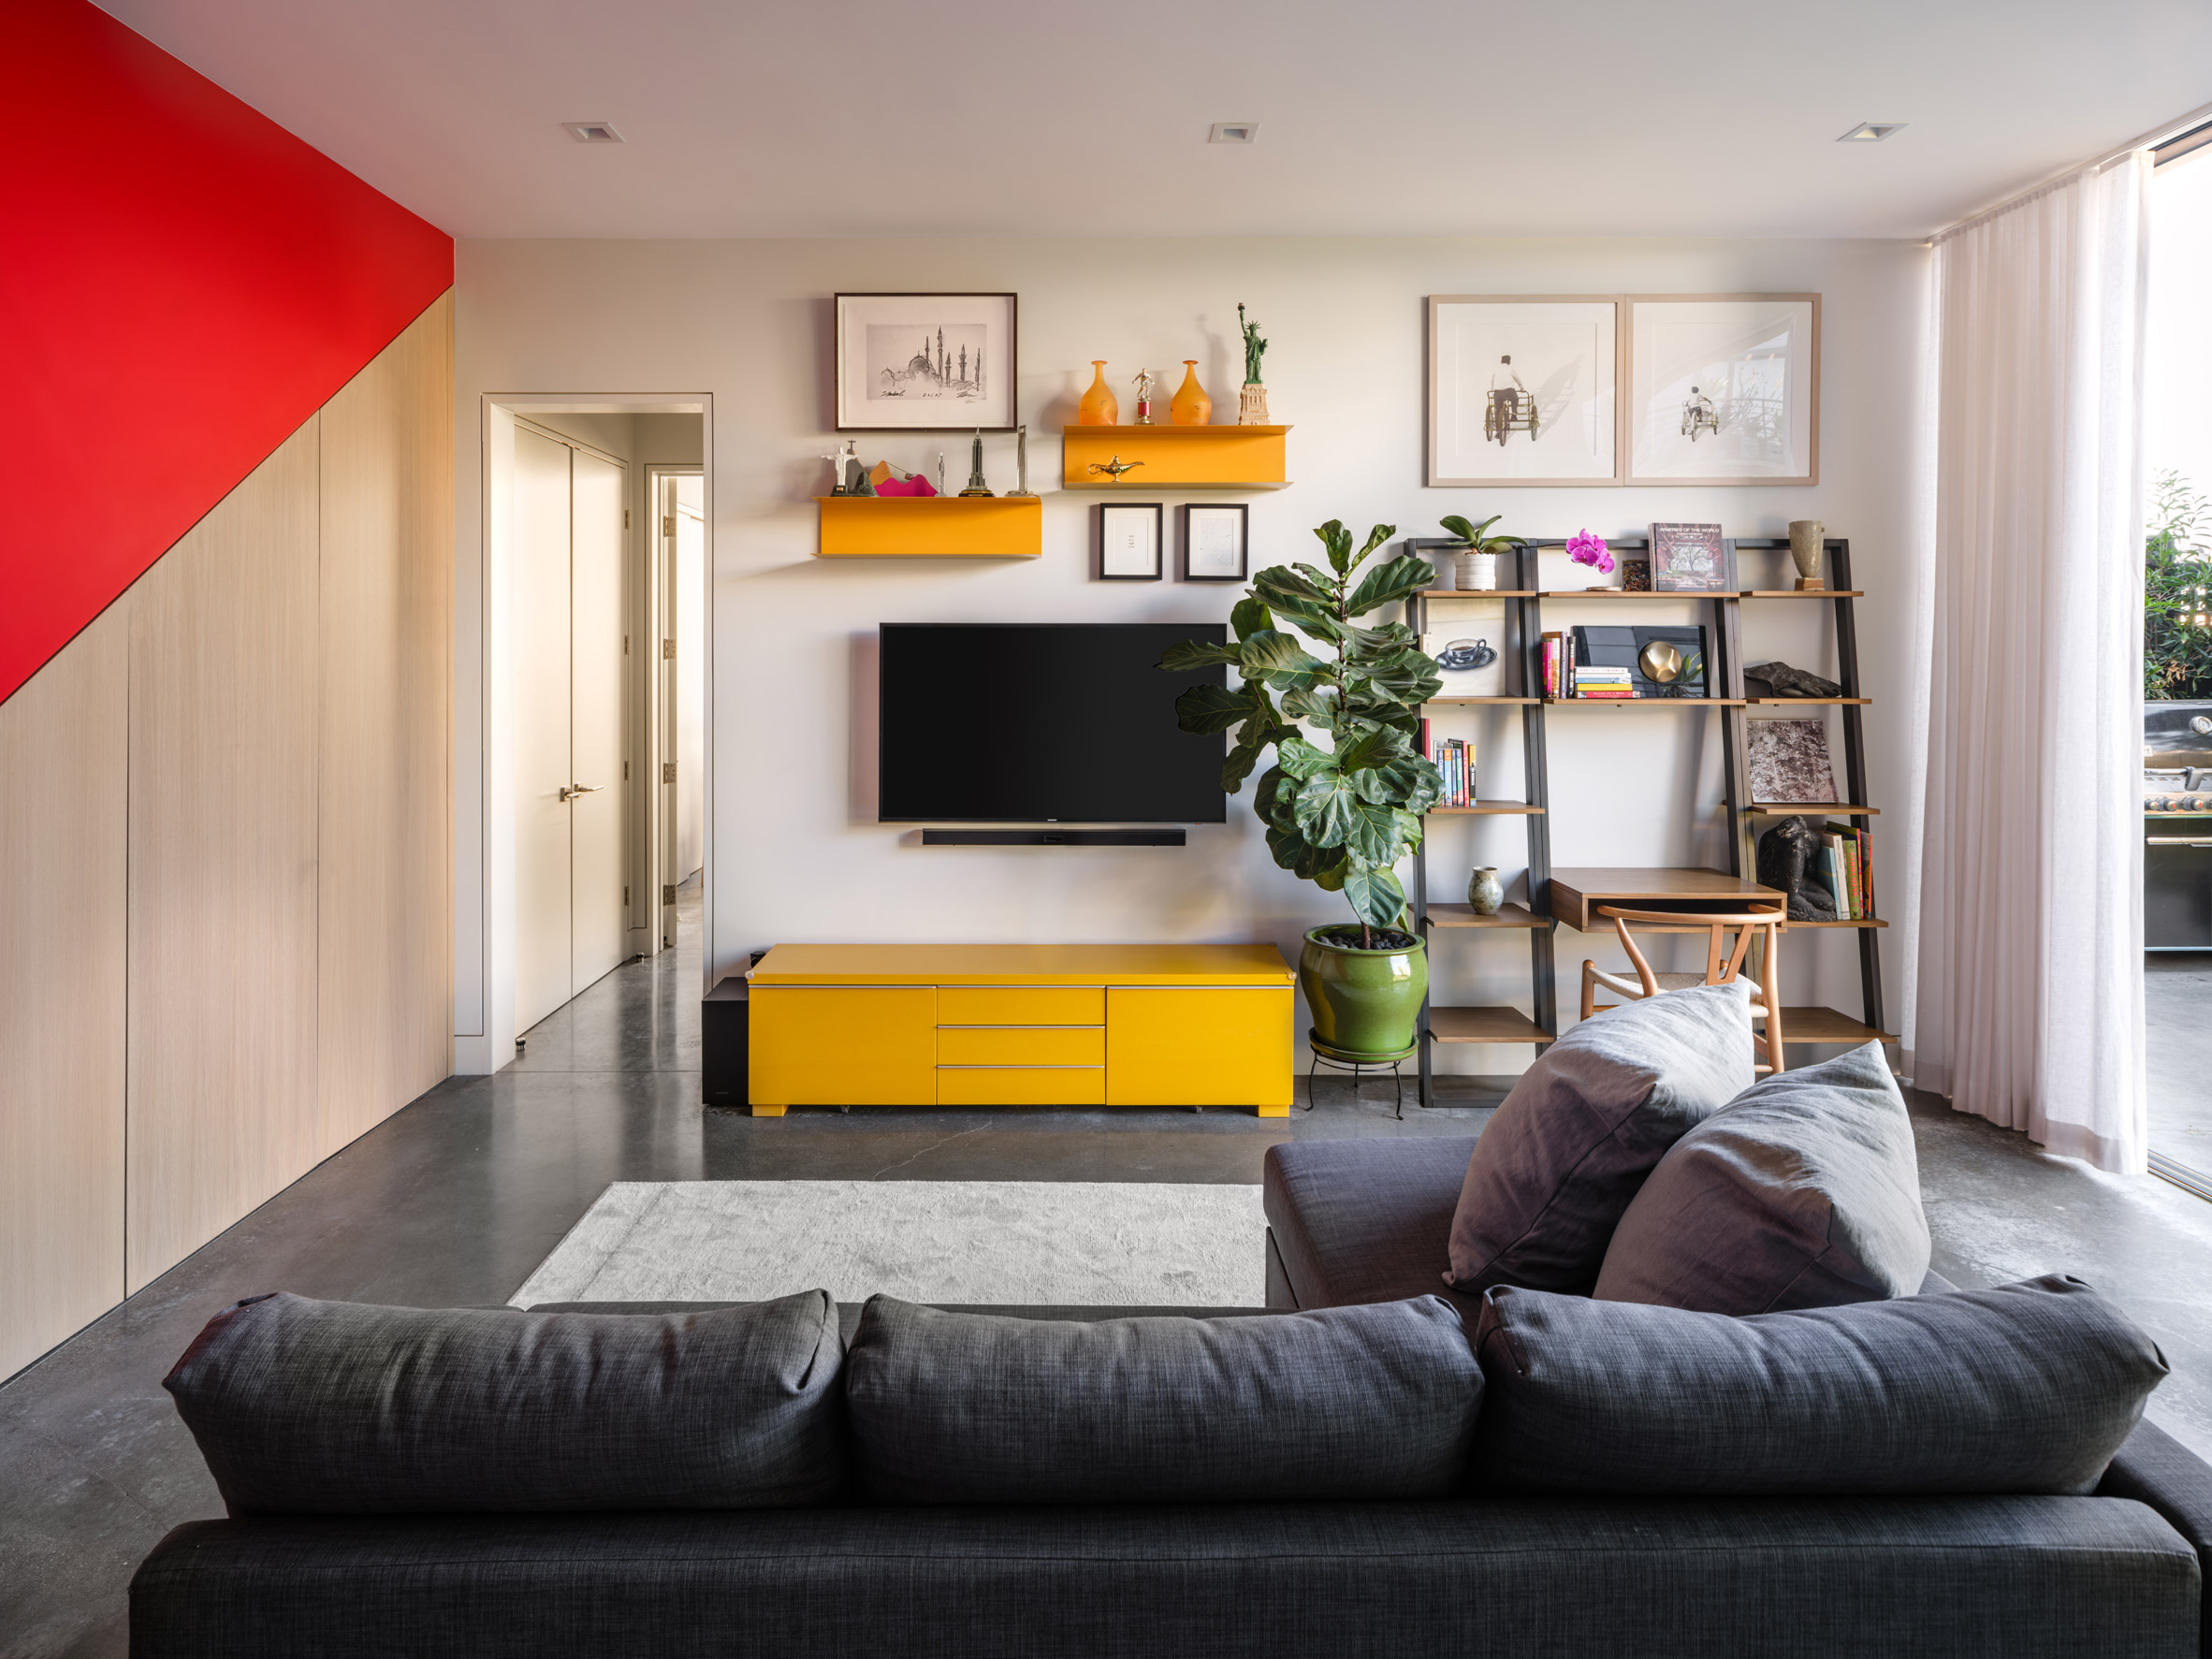 Living room at Red Stair House by Dumican Mosey with grey sofas and a red staircase